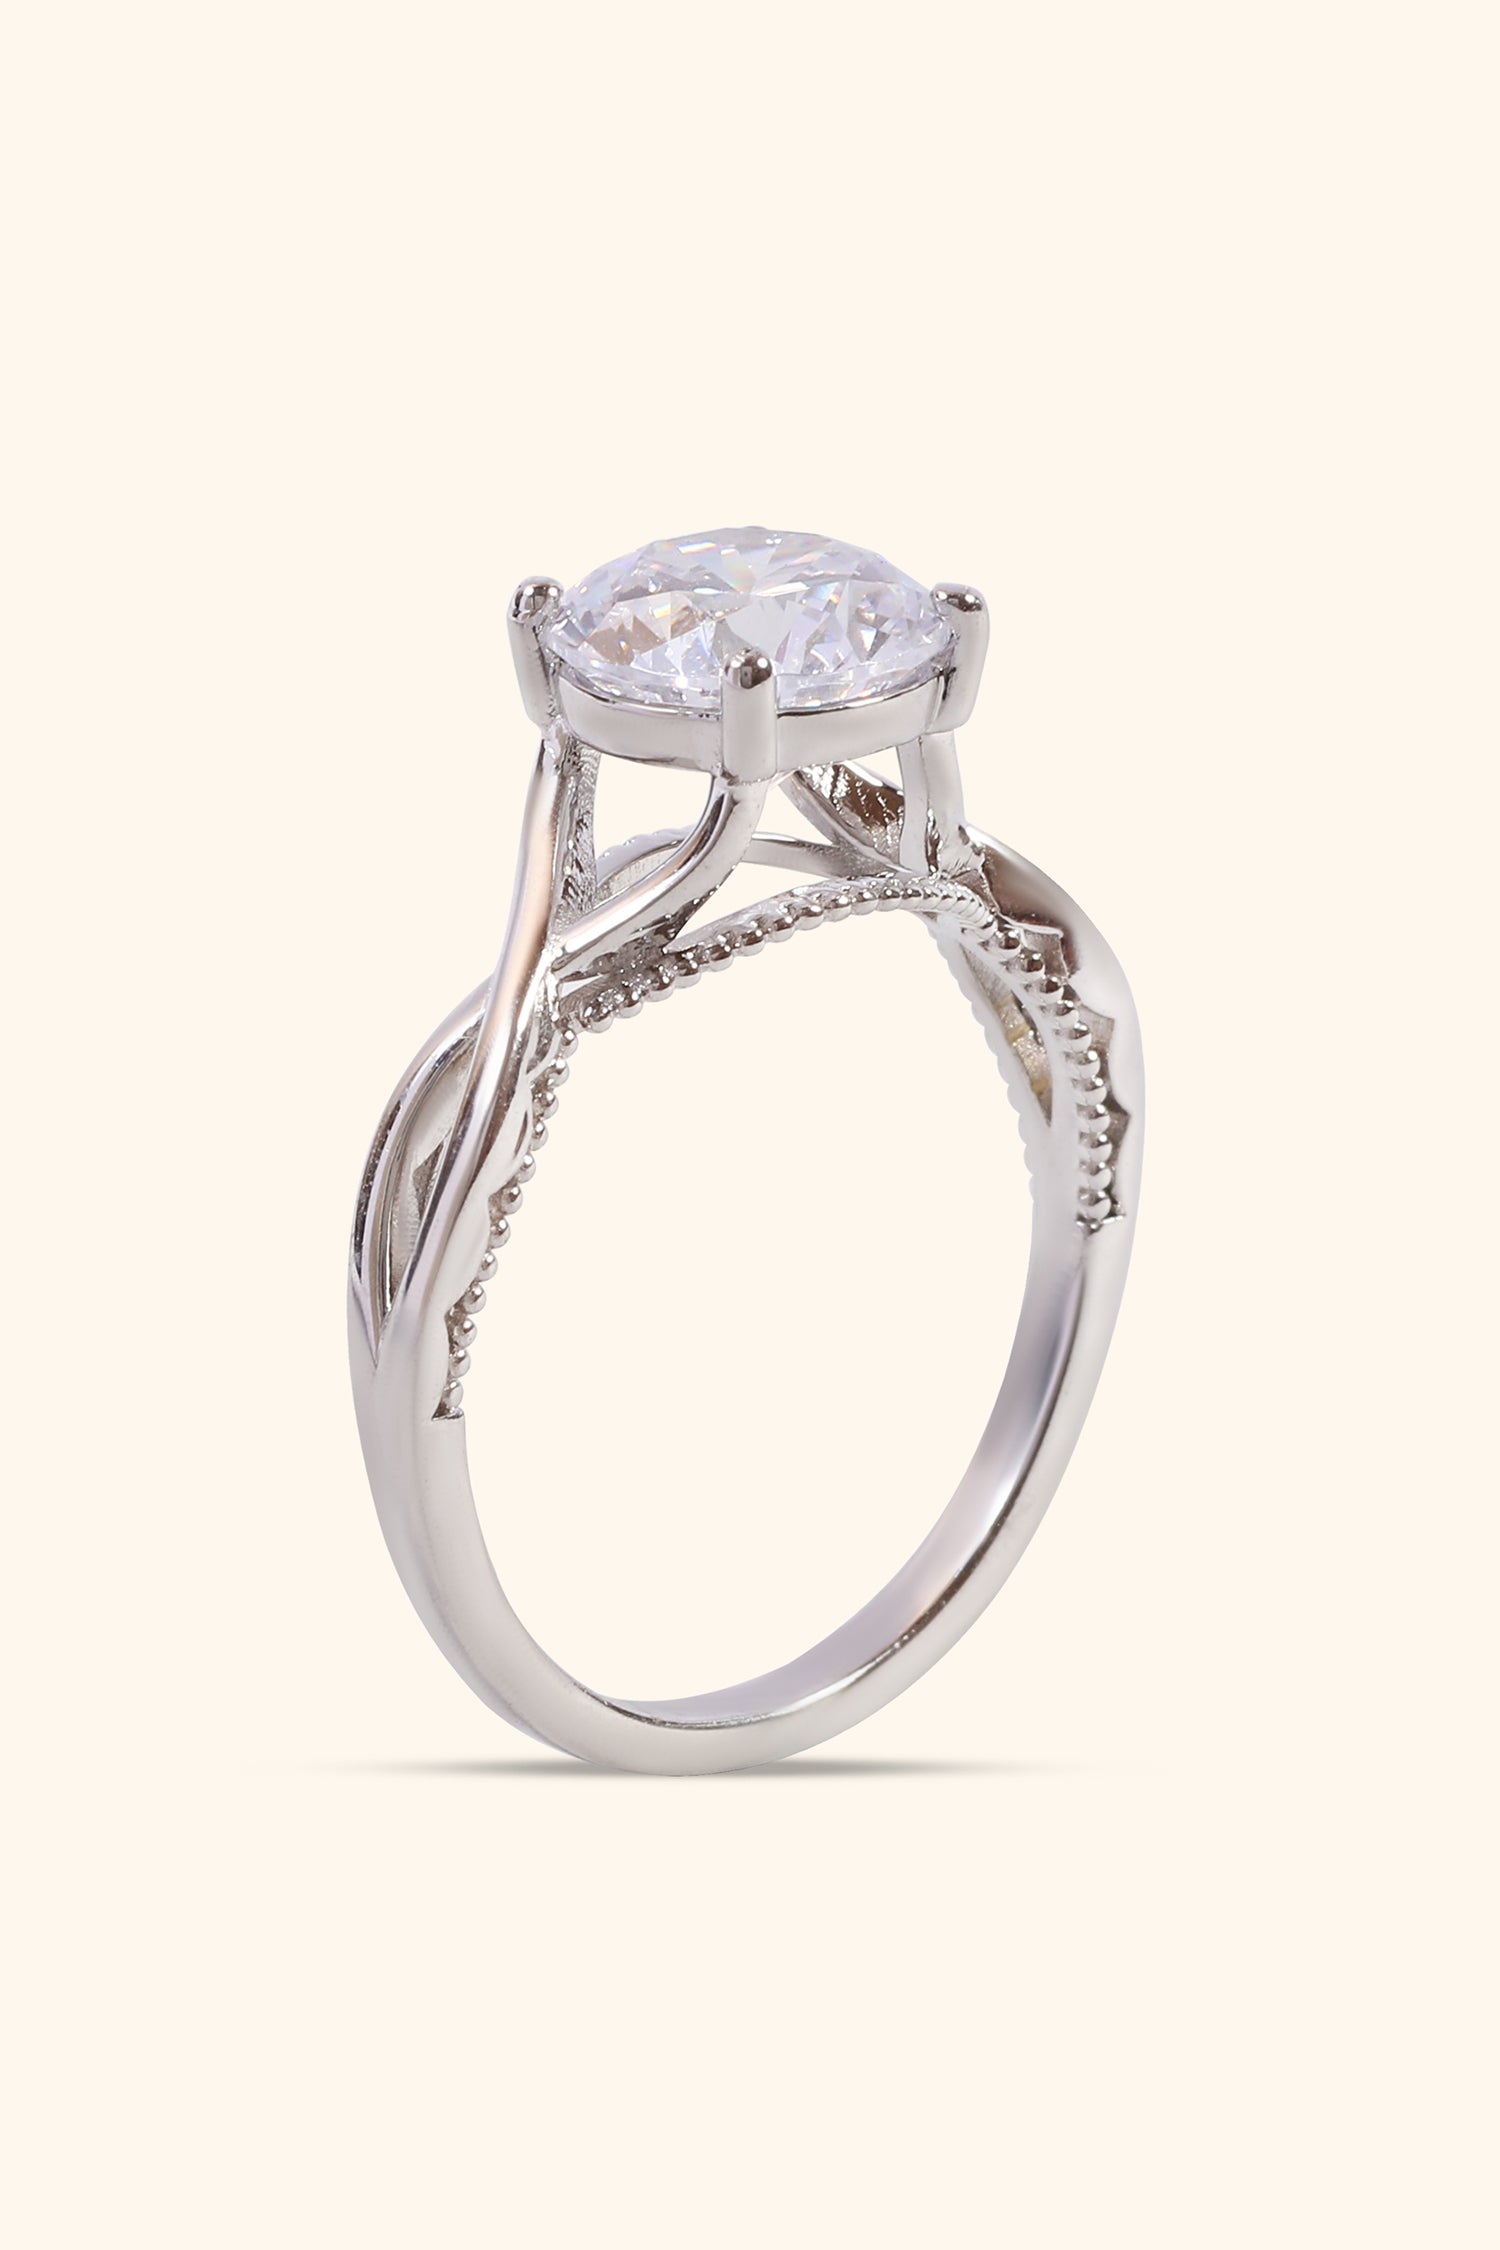 Sirena Ring with Round Brilliant Solitaire